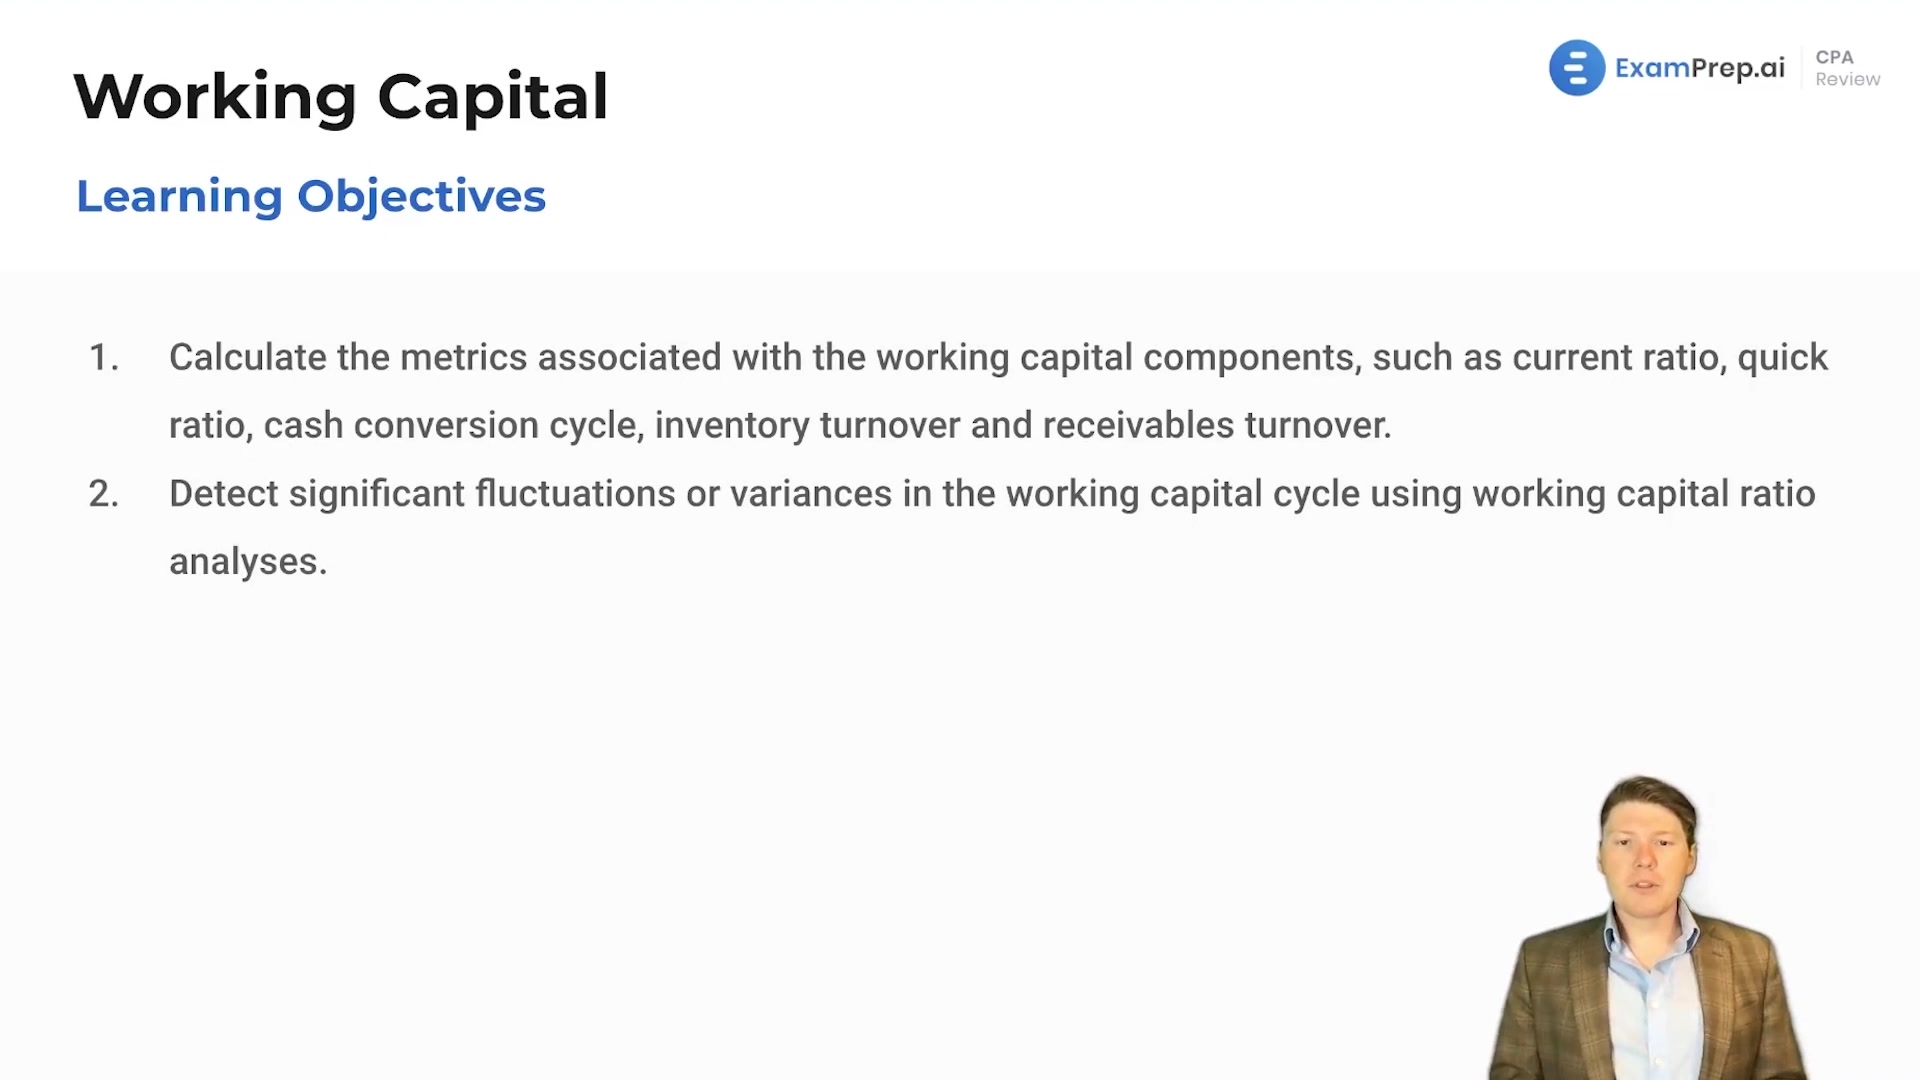 Working Capital Overview and Objectives lesson thumbnail